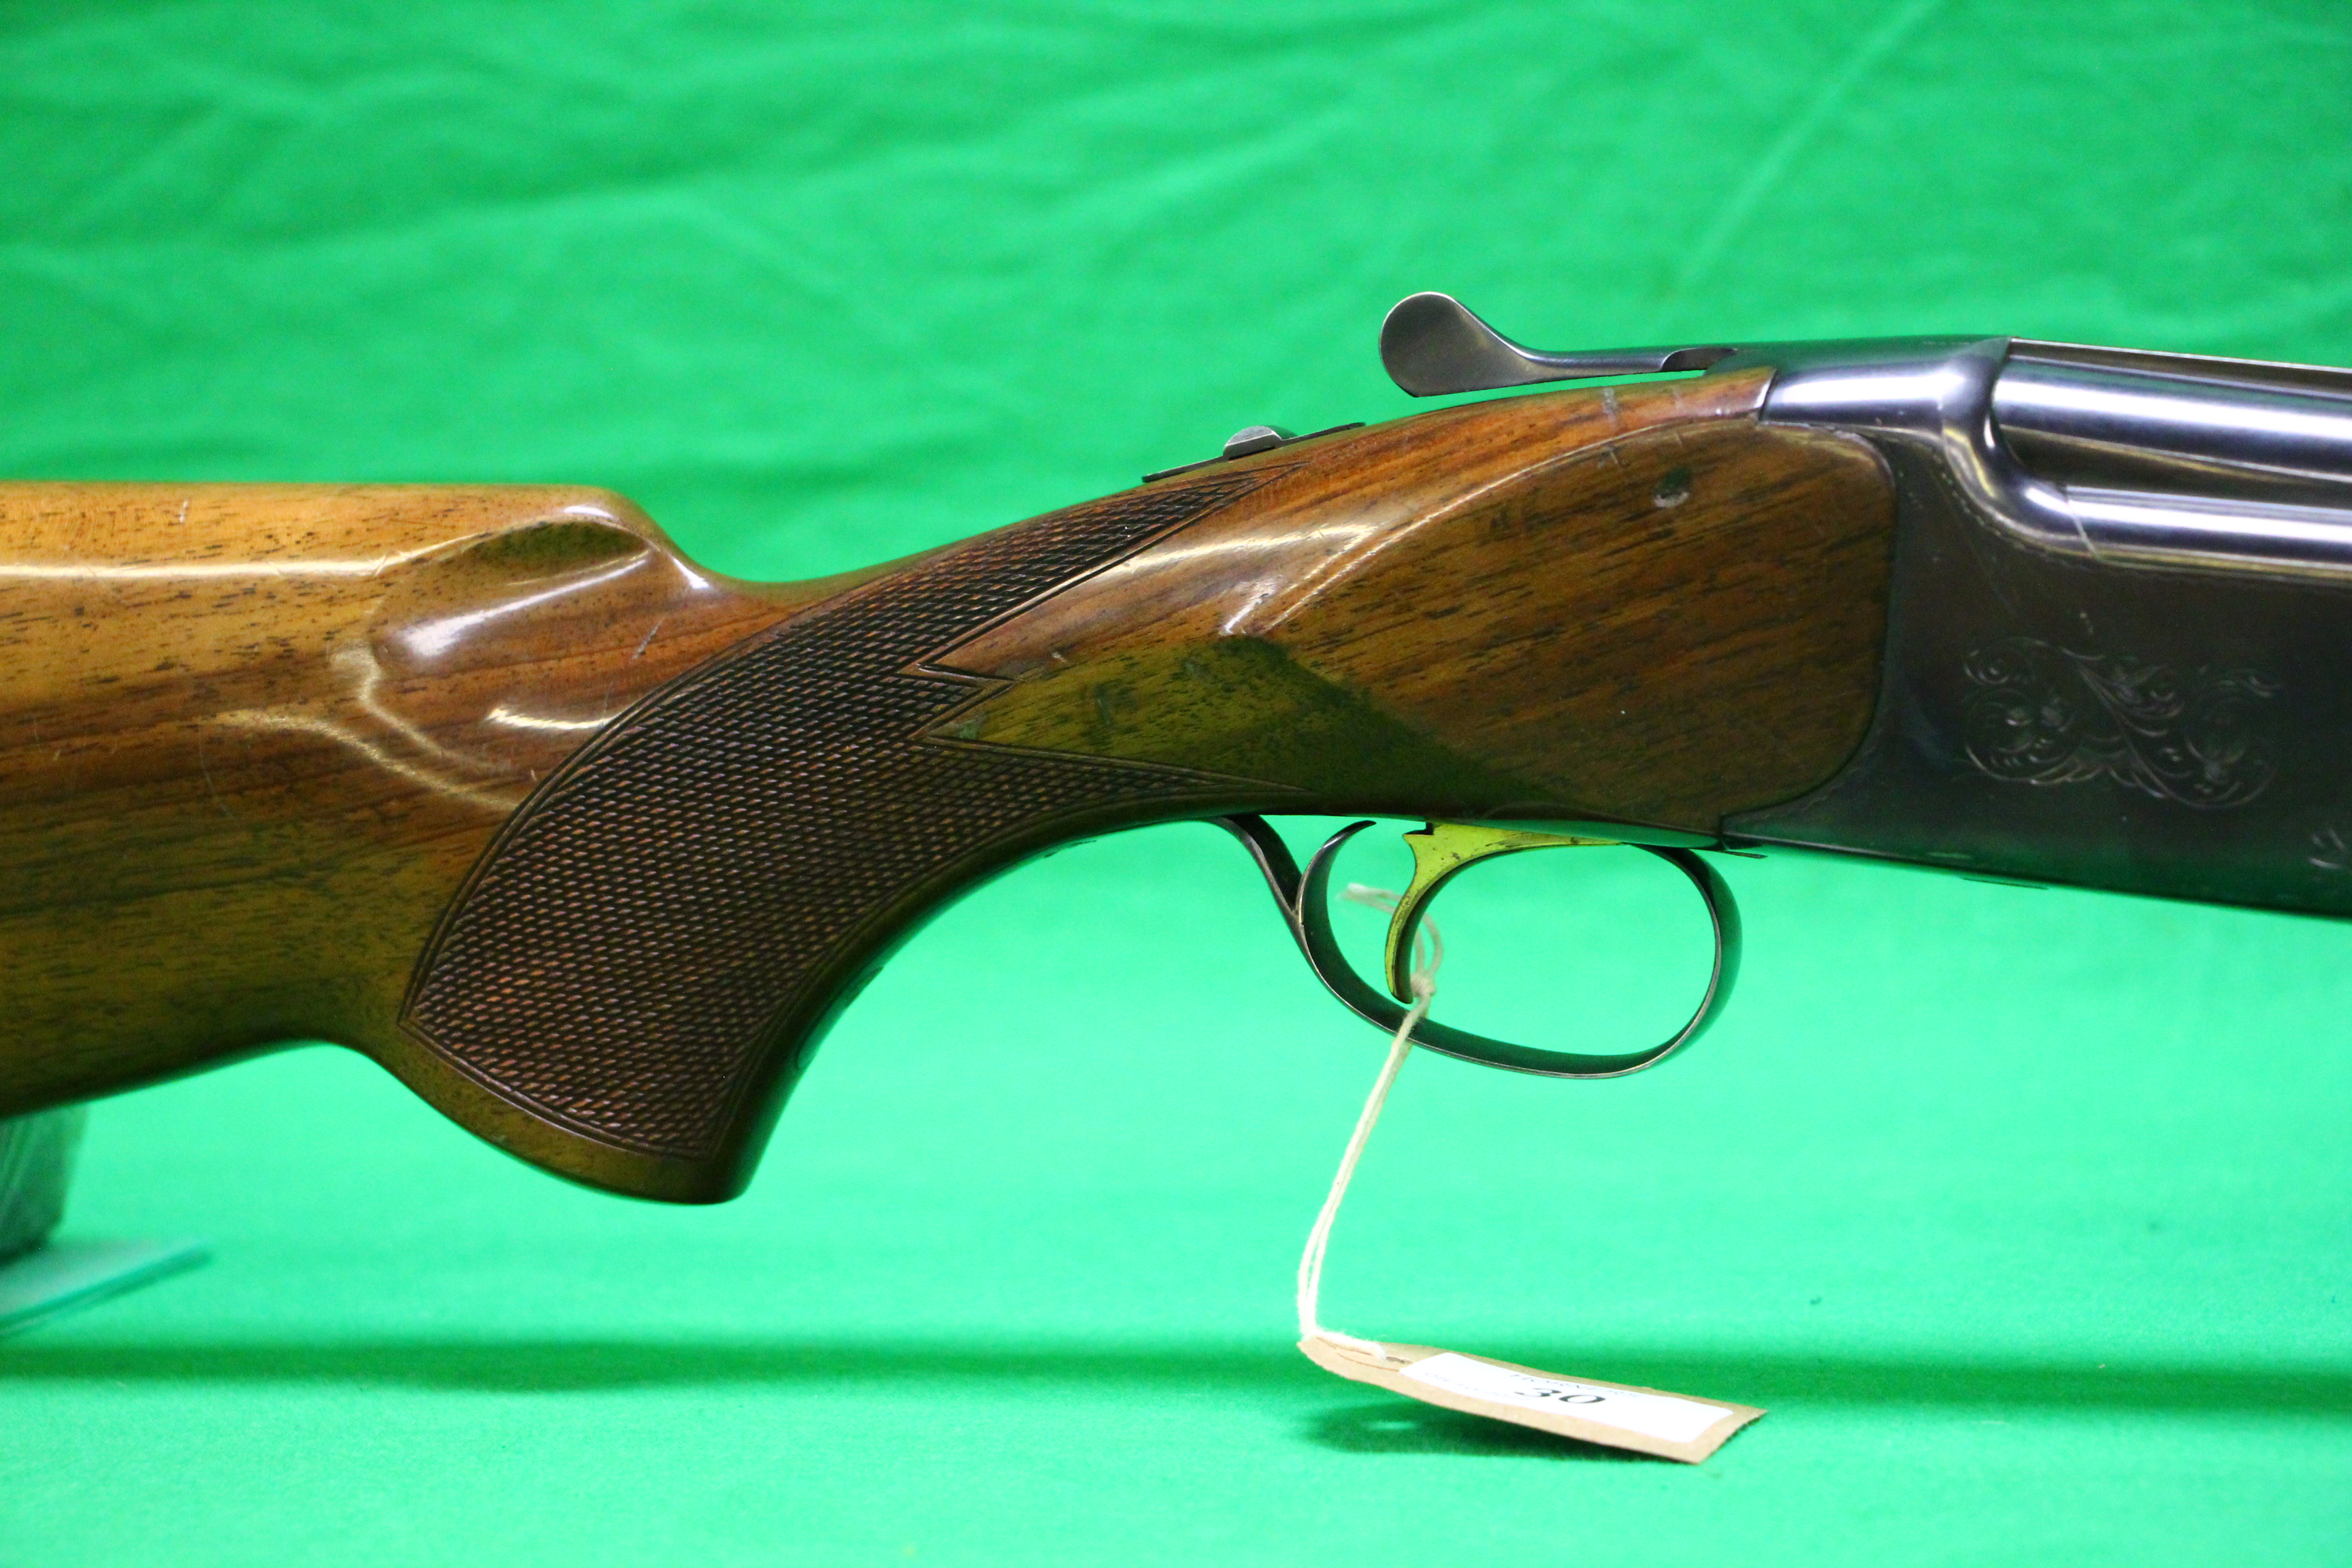 MIROKU 12 BORE OVER AND UNDER SHOTGUN #725637 AND GUN SLEEVE - (ALL GUNS TO BE INSPECTED AND - Image 3 of 8